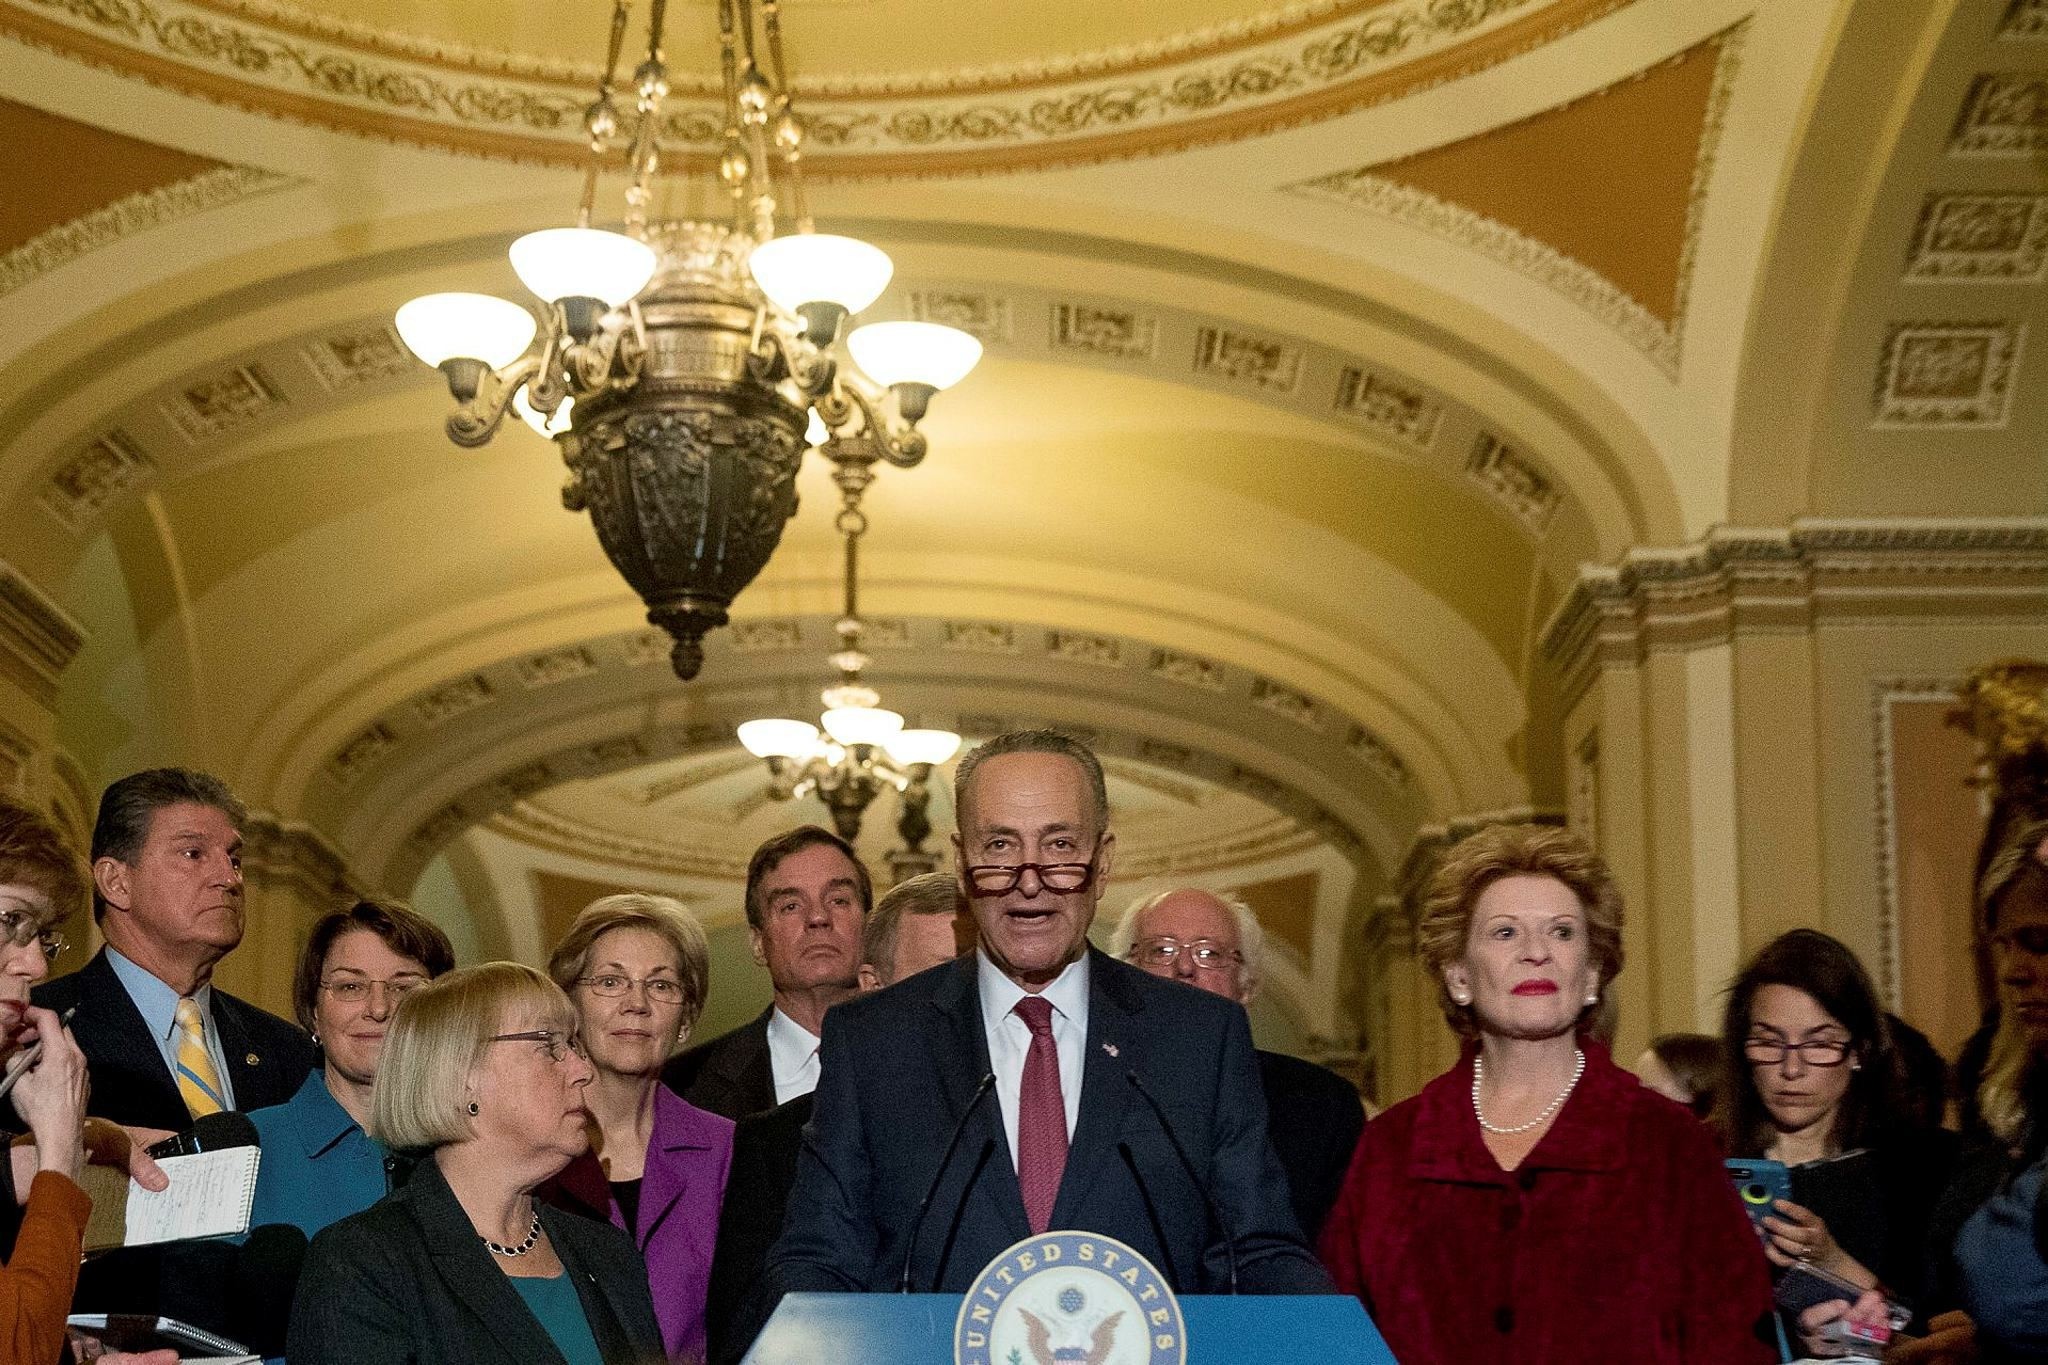 Sen. Chuck Schumer, D-N.Y., center, accompanied by the Senate Democrats, speaks to reporters on Capitol Hill in Washington, Wednesday, Nov. 16, 2016. (AP Photo)